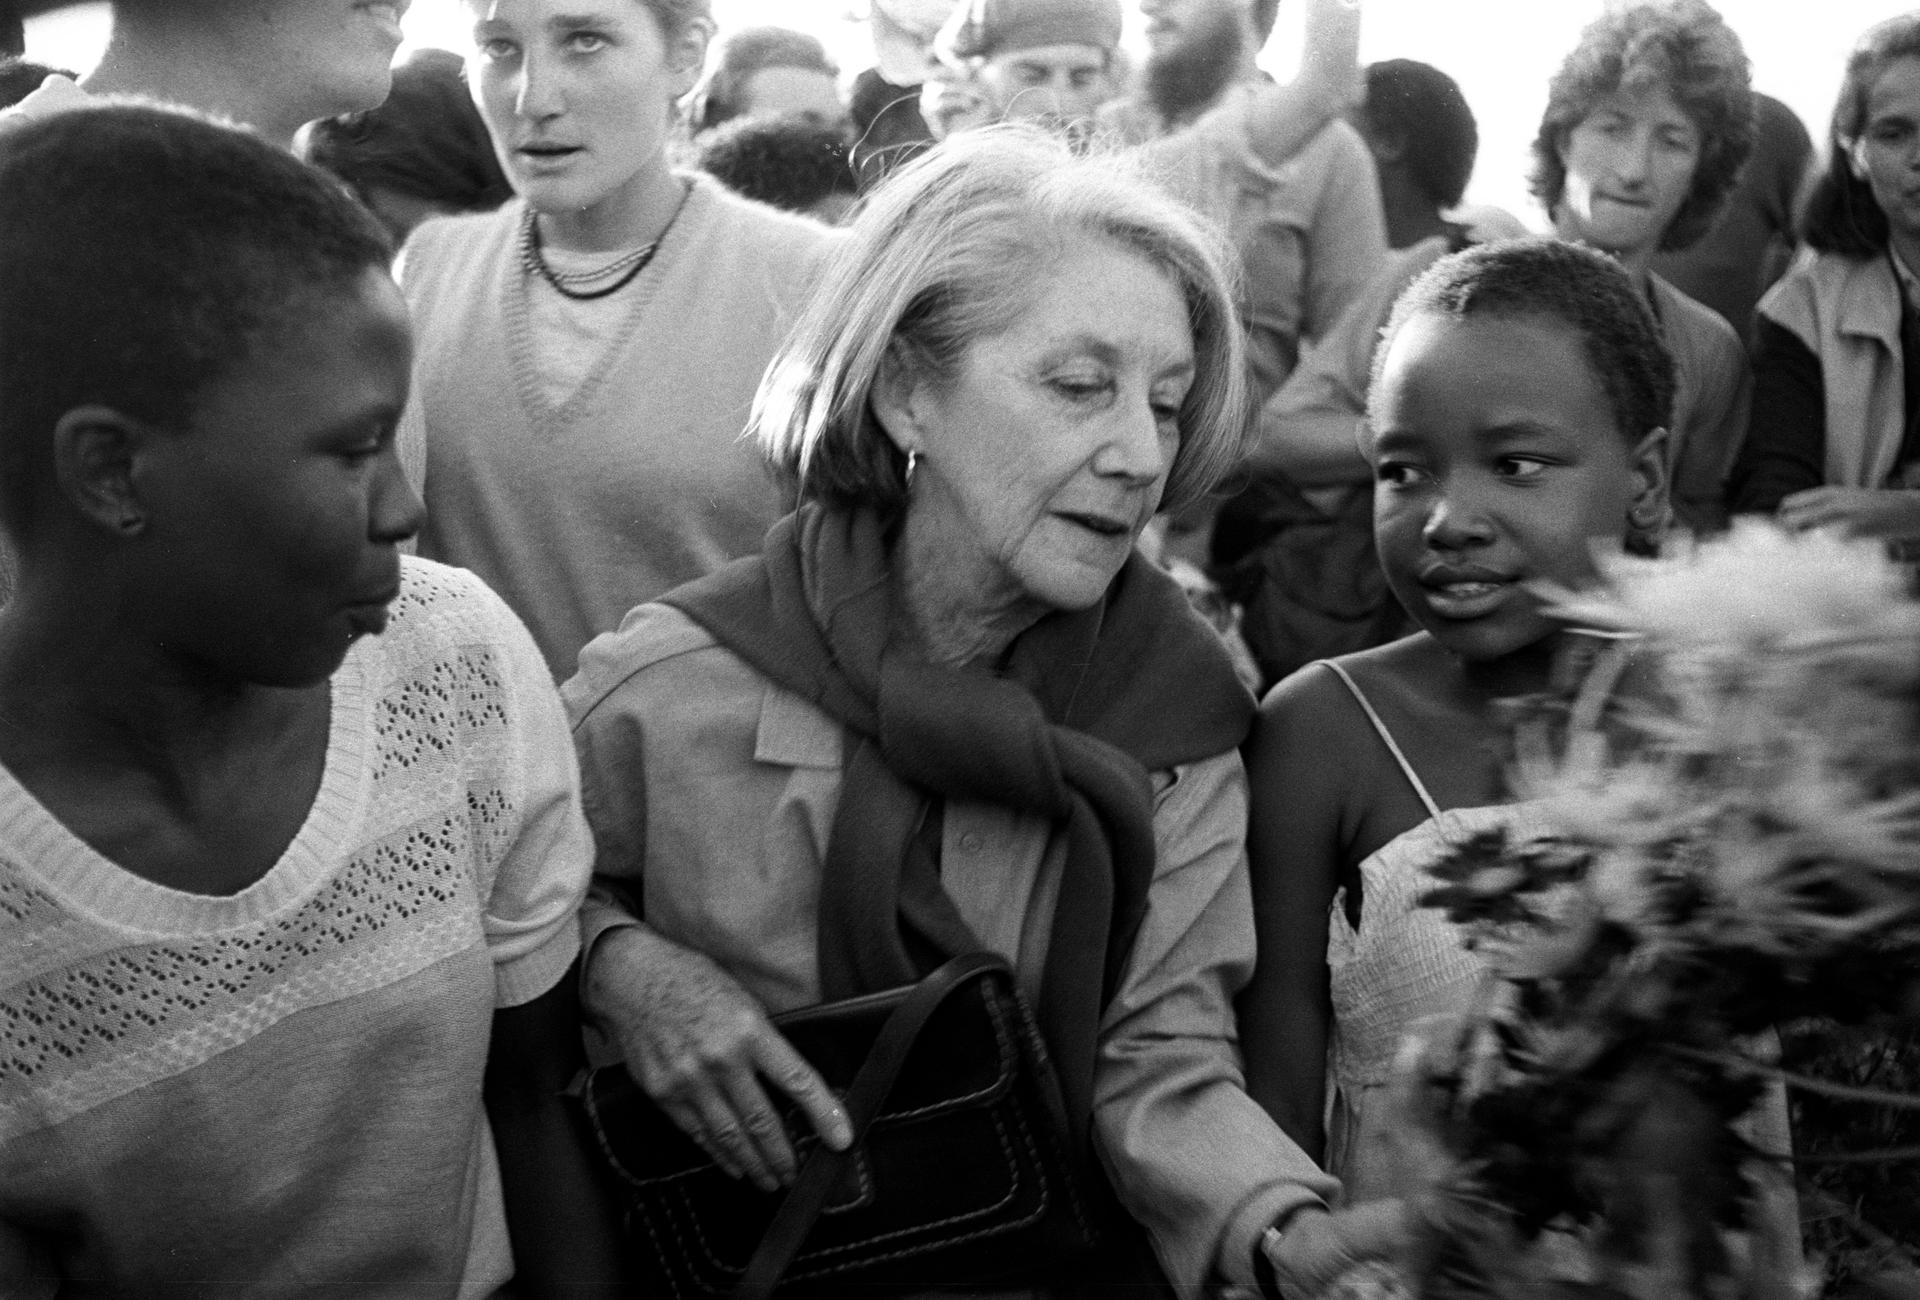 Novelist Nadine Gordimer was among about 300 white liberals who visited Alexandra, the black township near Johannesburg on May 18, 1986 to lay wreaths at the grave of victims of political unrest.